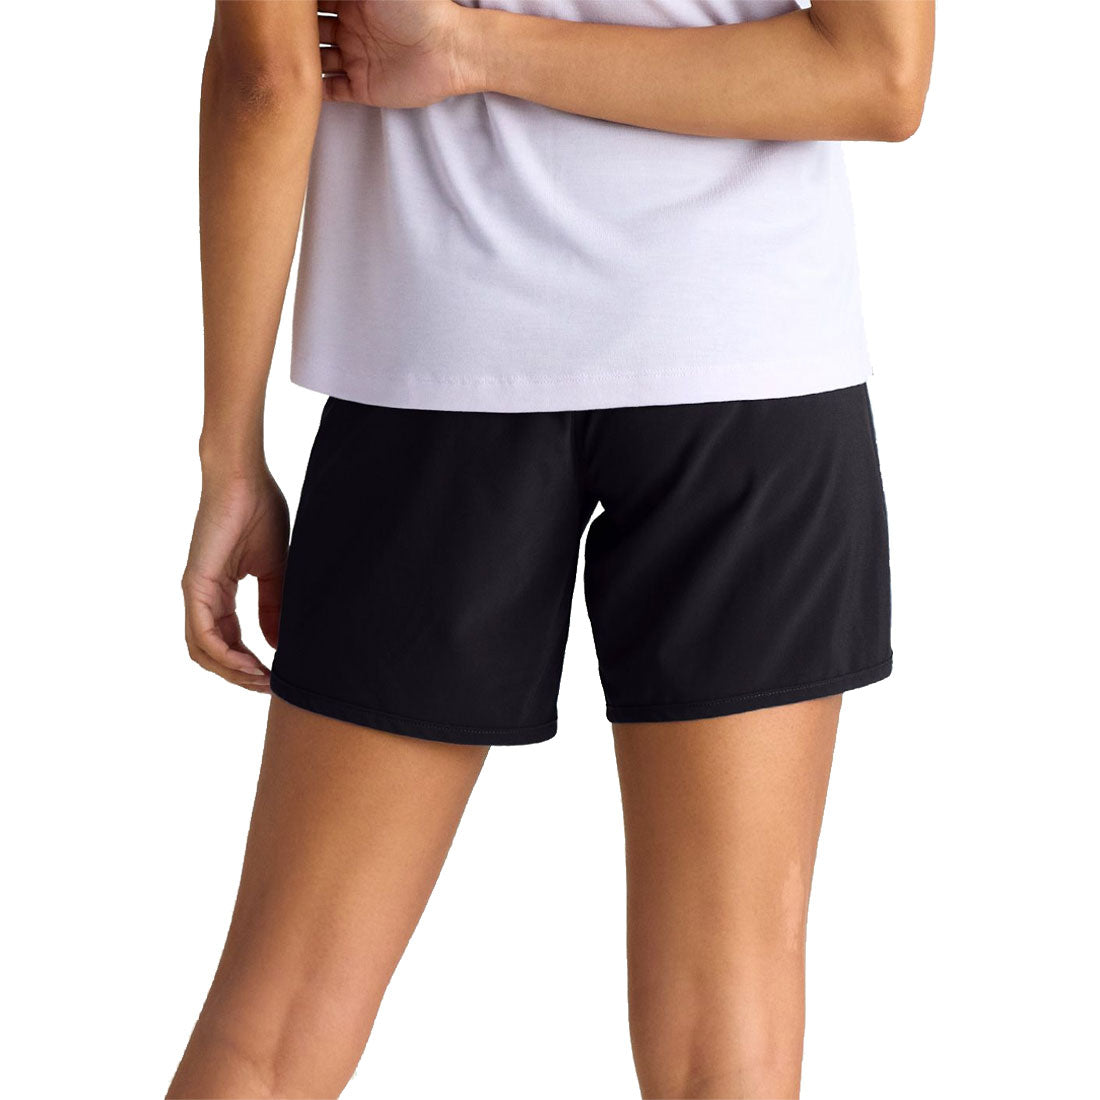 Free Fly Bamboo Lined Breeze Short - Women's